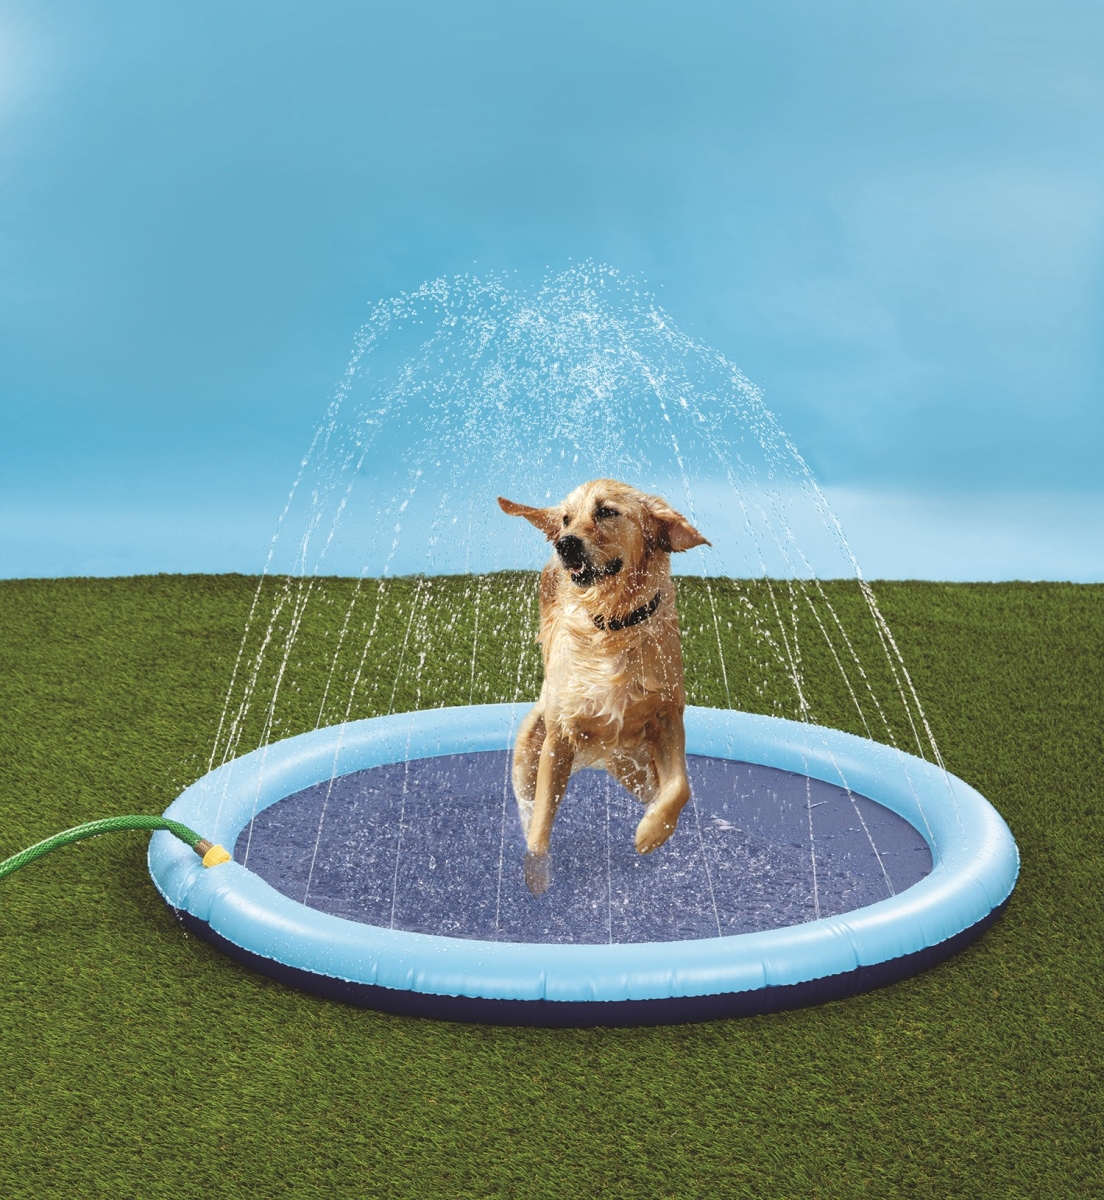 Picture of 212 Main 5297 Sprinkler Pals Dog Pool